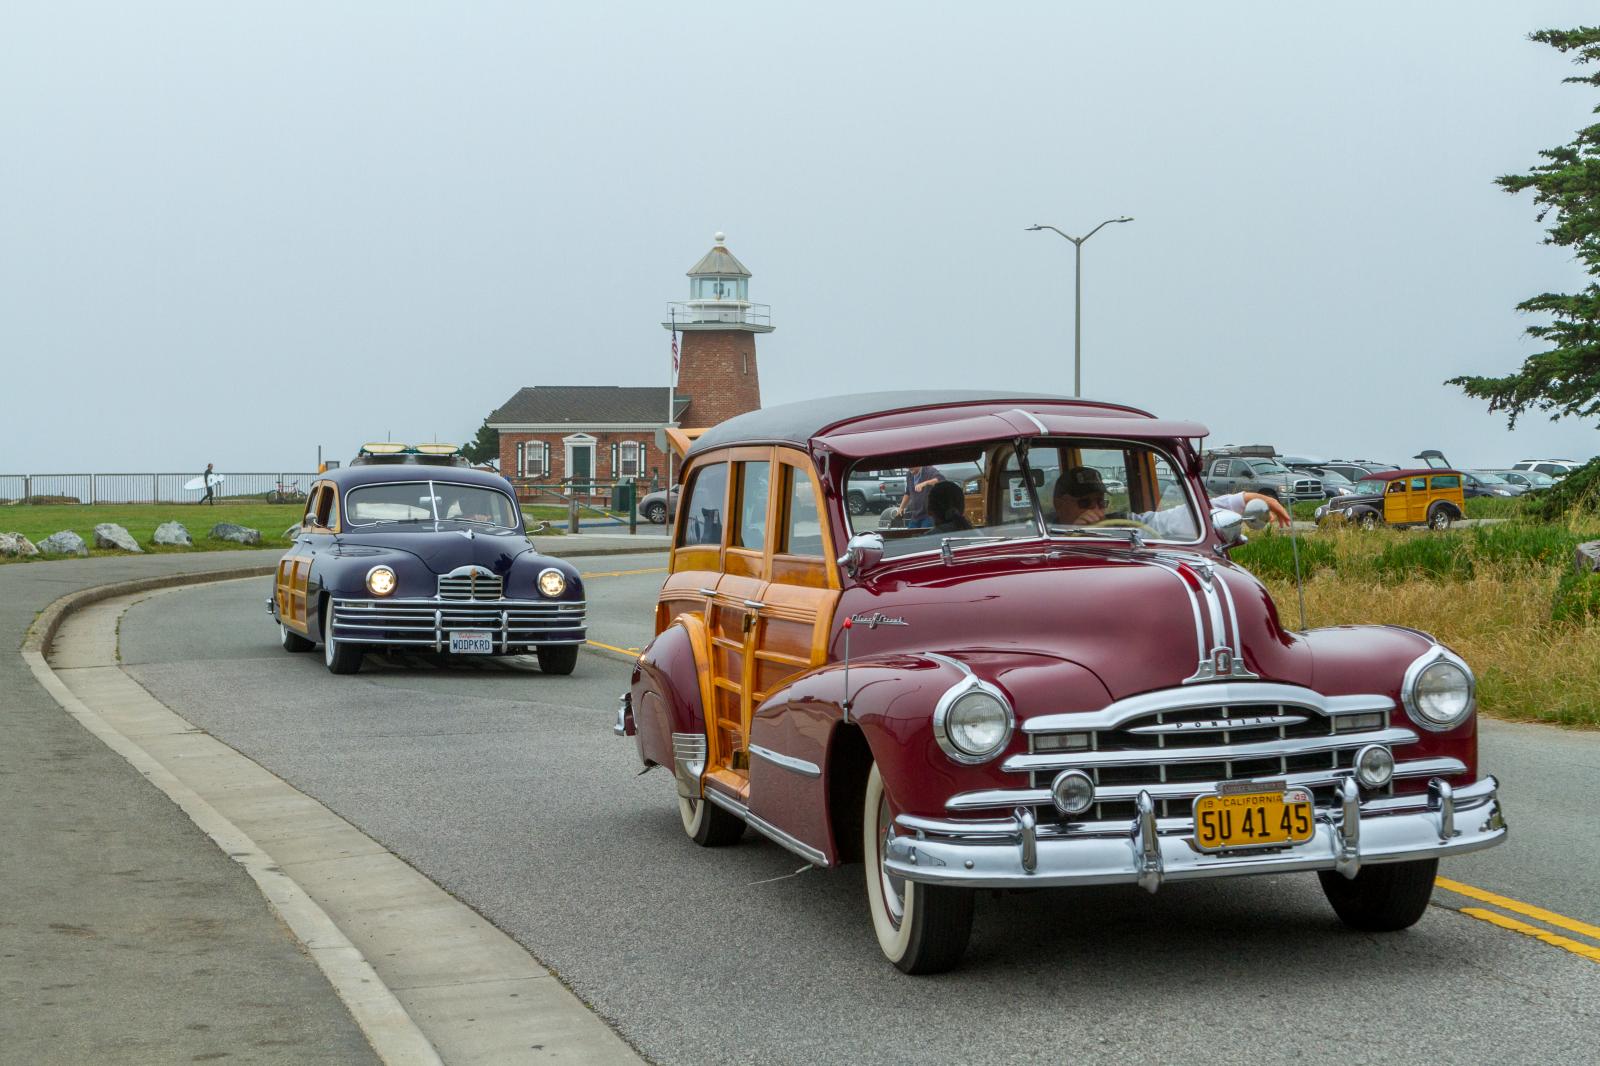 Woodies on West Cliff Drive | Buy this image